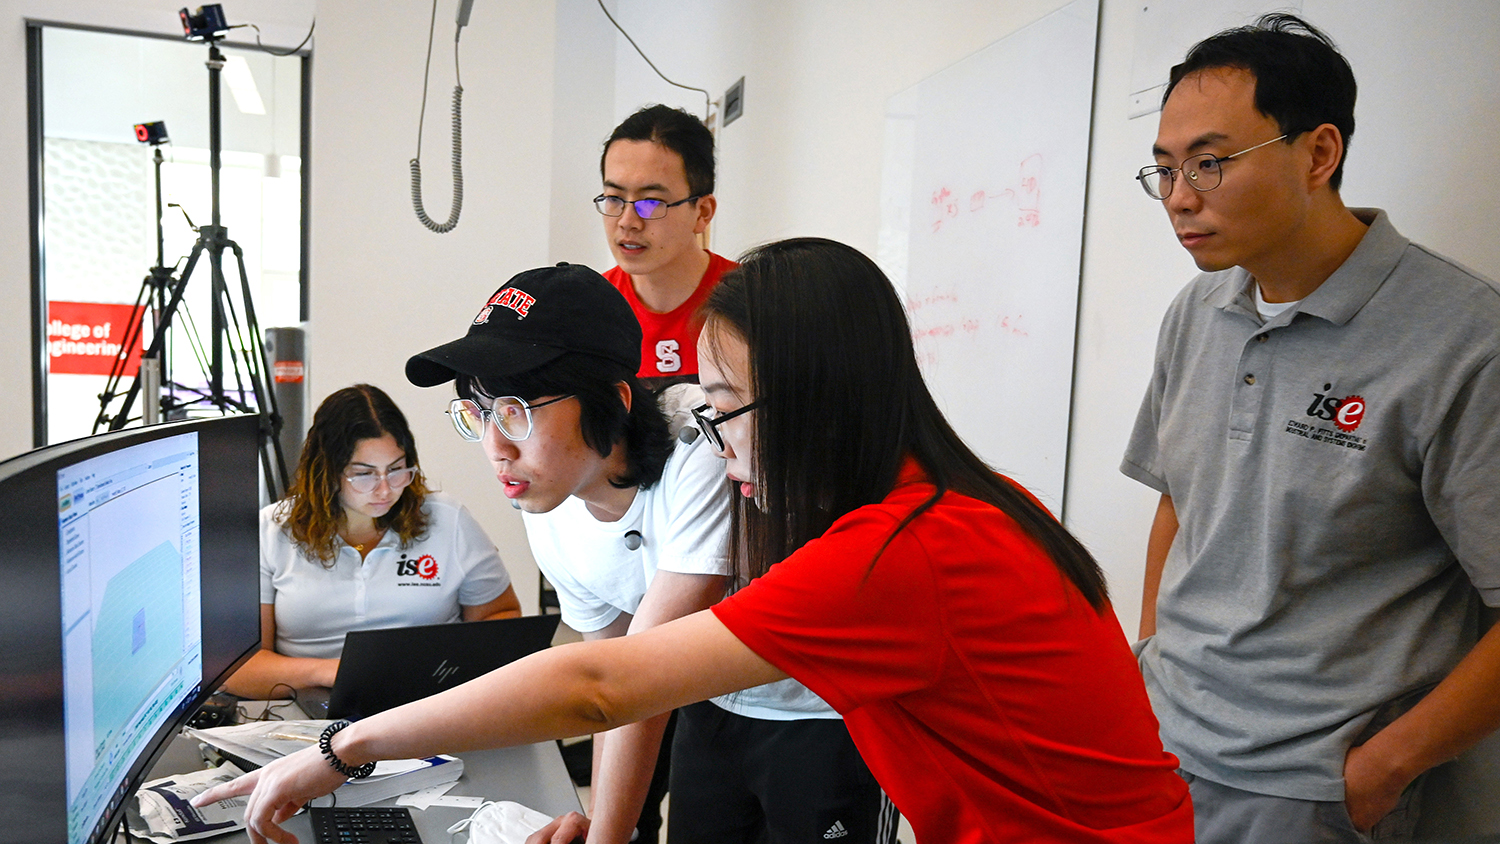 Students interact with robots and imaging software to help better understand the relationships between computers and humans. The Human-Systems engineering lab research aims to improve human safety through human movement measurement and deep learning.